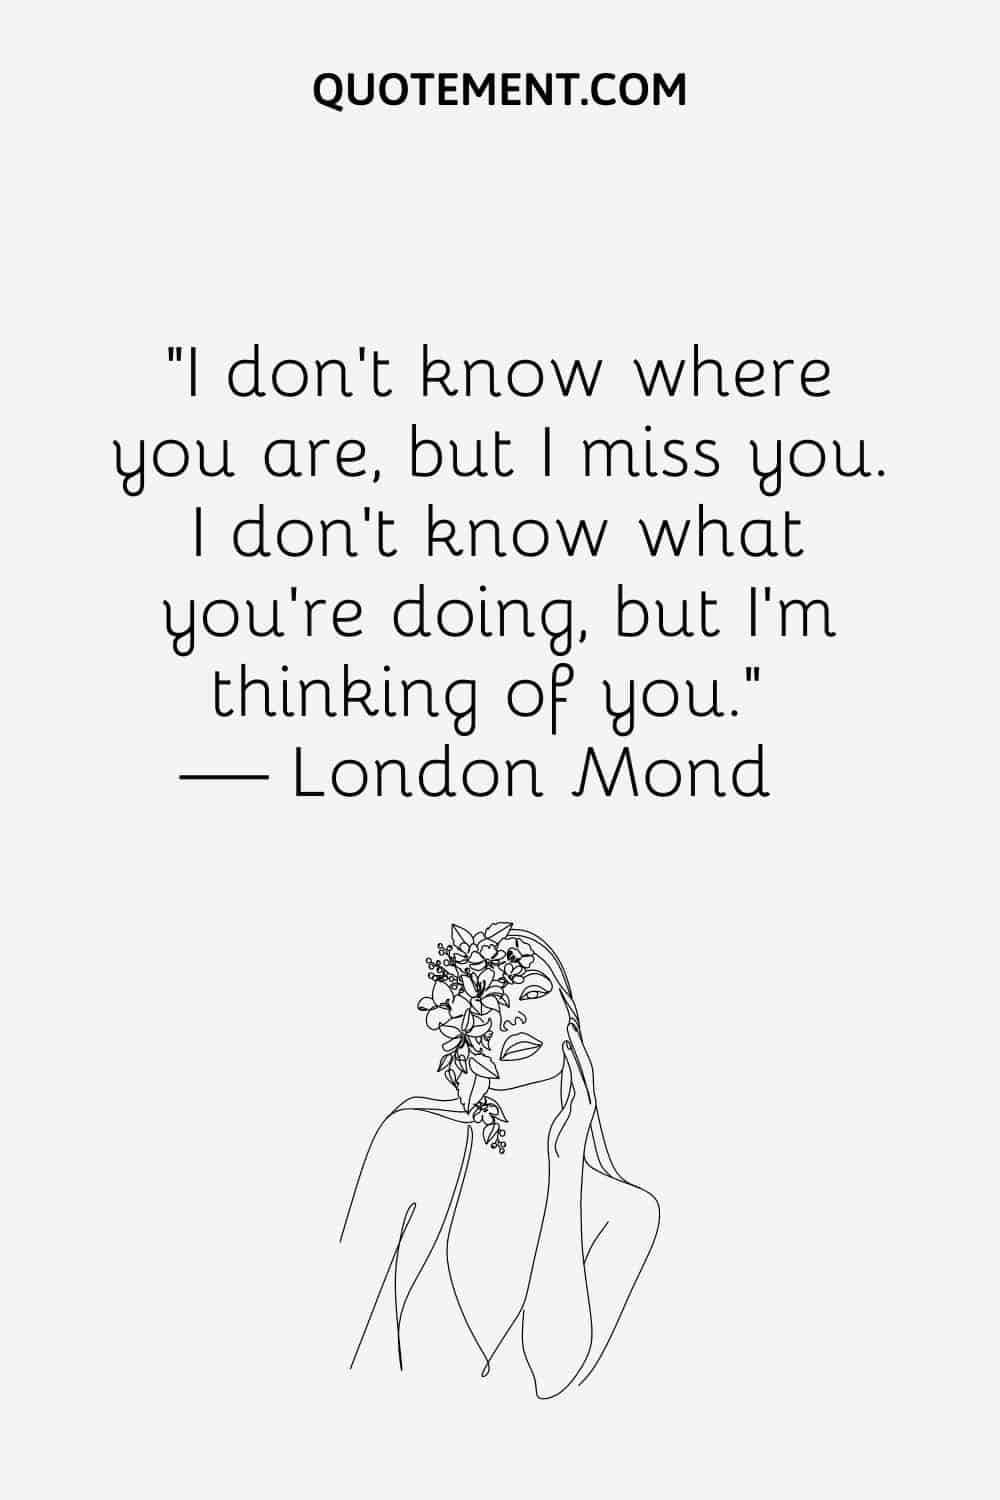 “I don’t know where you are, but I miss you. I don’t know what you’re doing, but I’m thinking of you.” — London Mond
